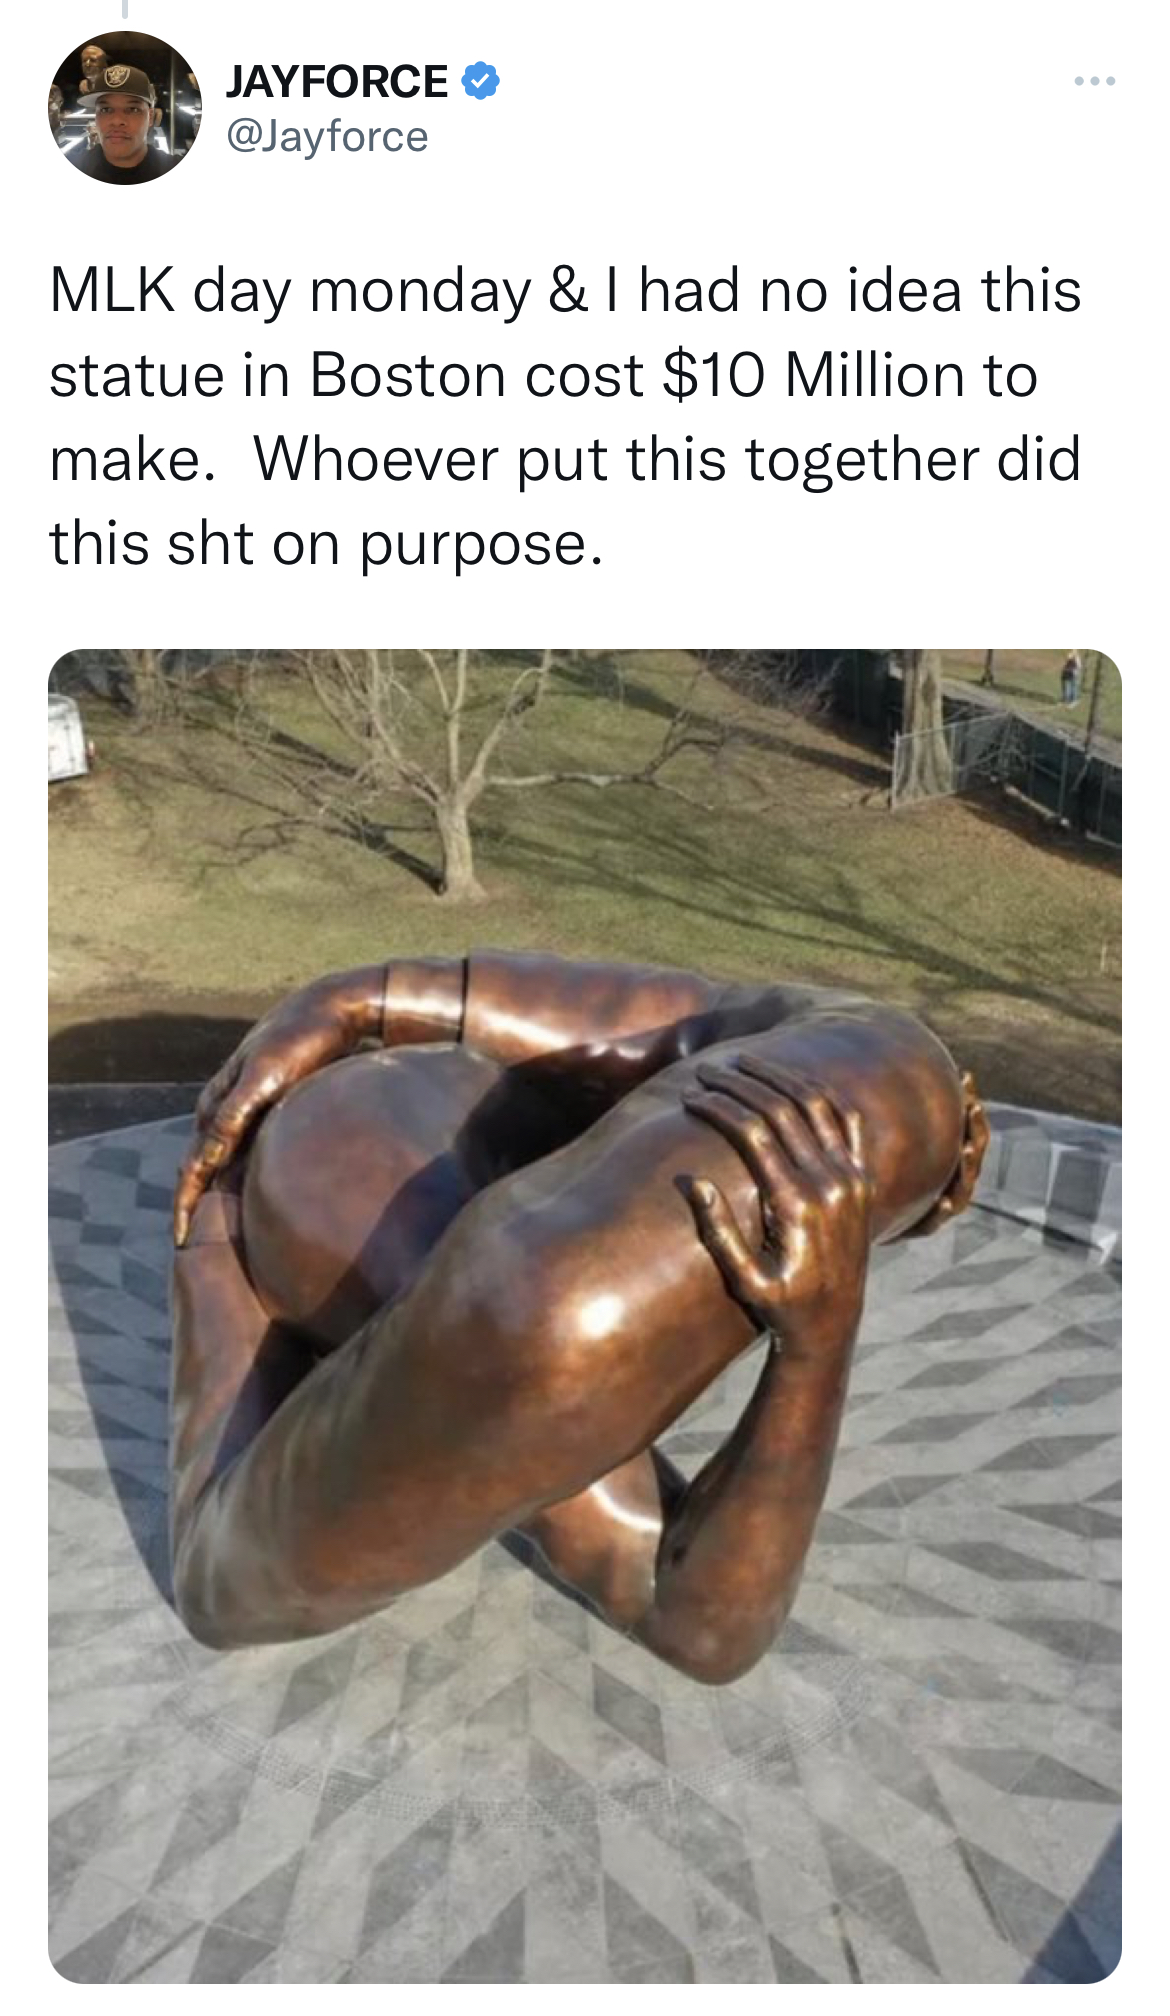 MLK Jr. Sculpture memes - photo caption - Jayforce Mlk day monday & I had no idea this statue in Boston cost $10 Million to make. Whoever put this together did this sht on purpose.